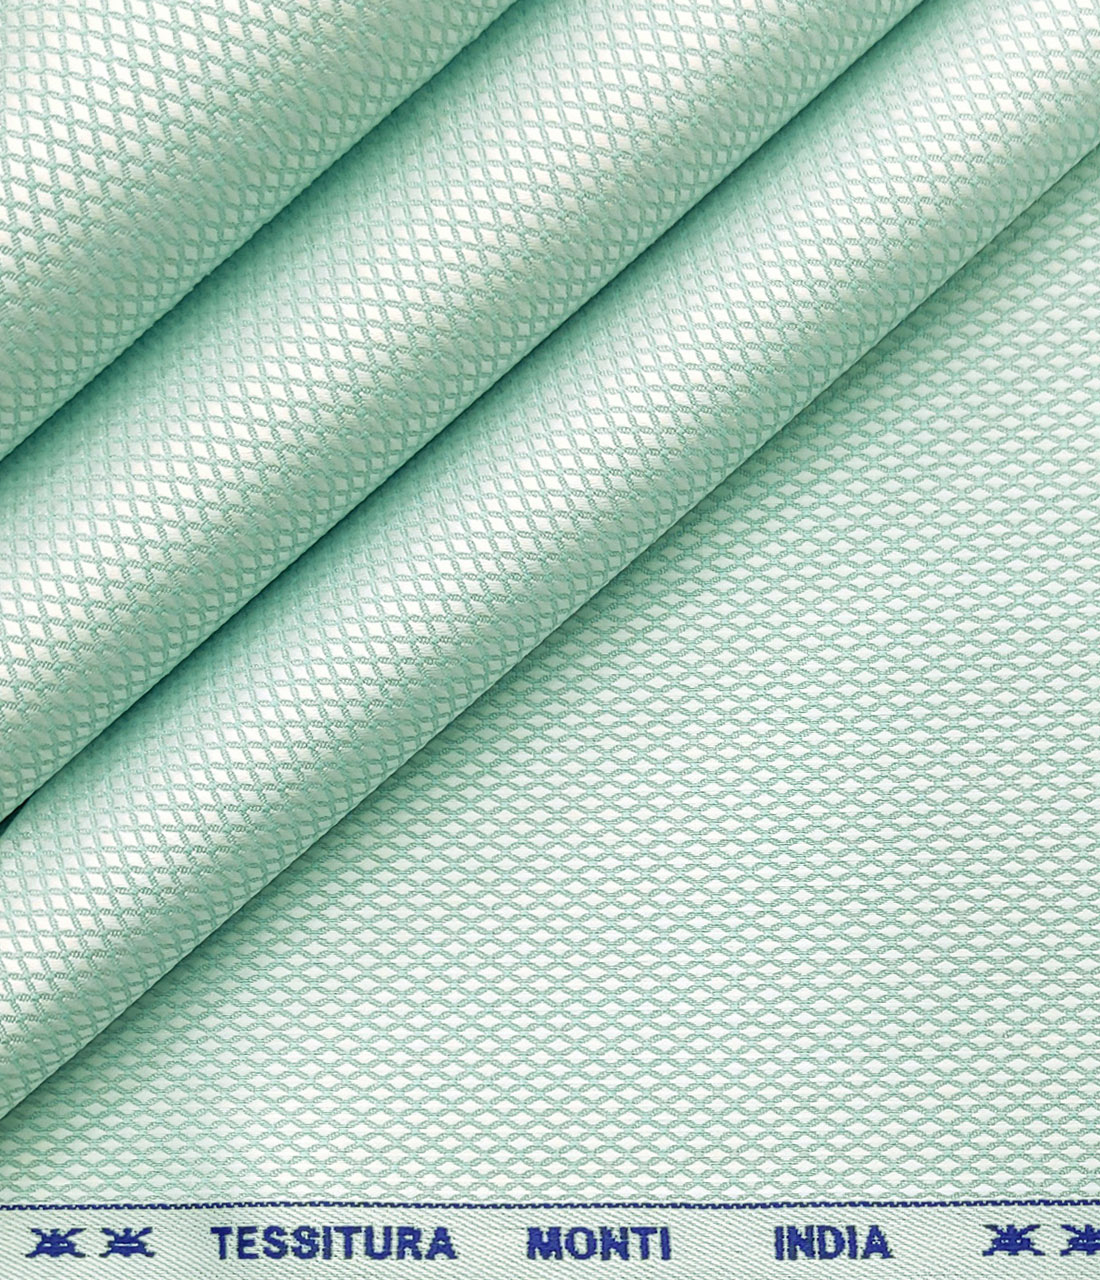 Tessitura Monti Men's Giza Cotton Structured 2 Meter Unstitched Shirting Fabric (Mint Green)